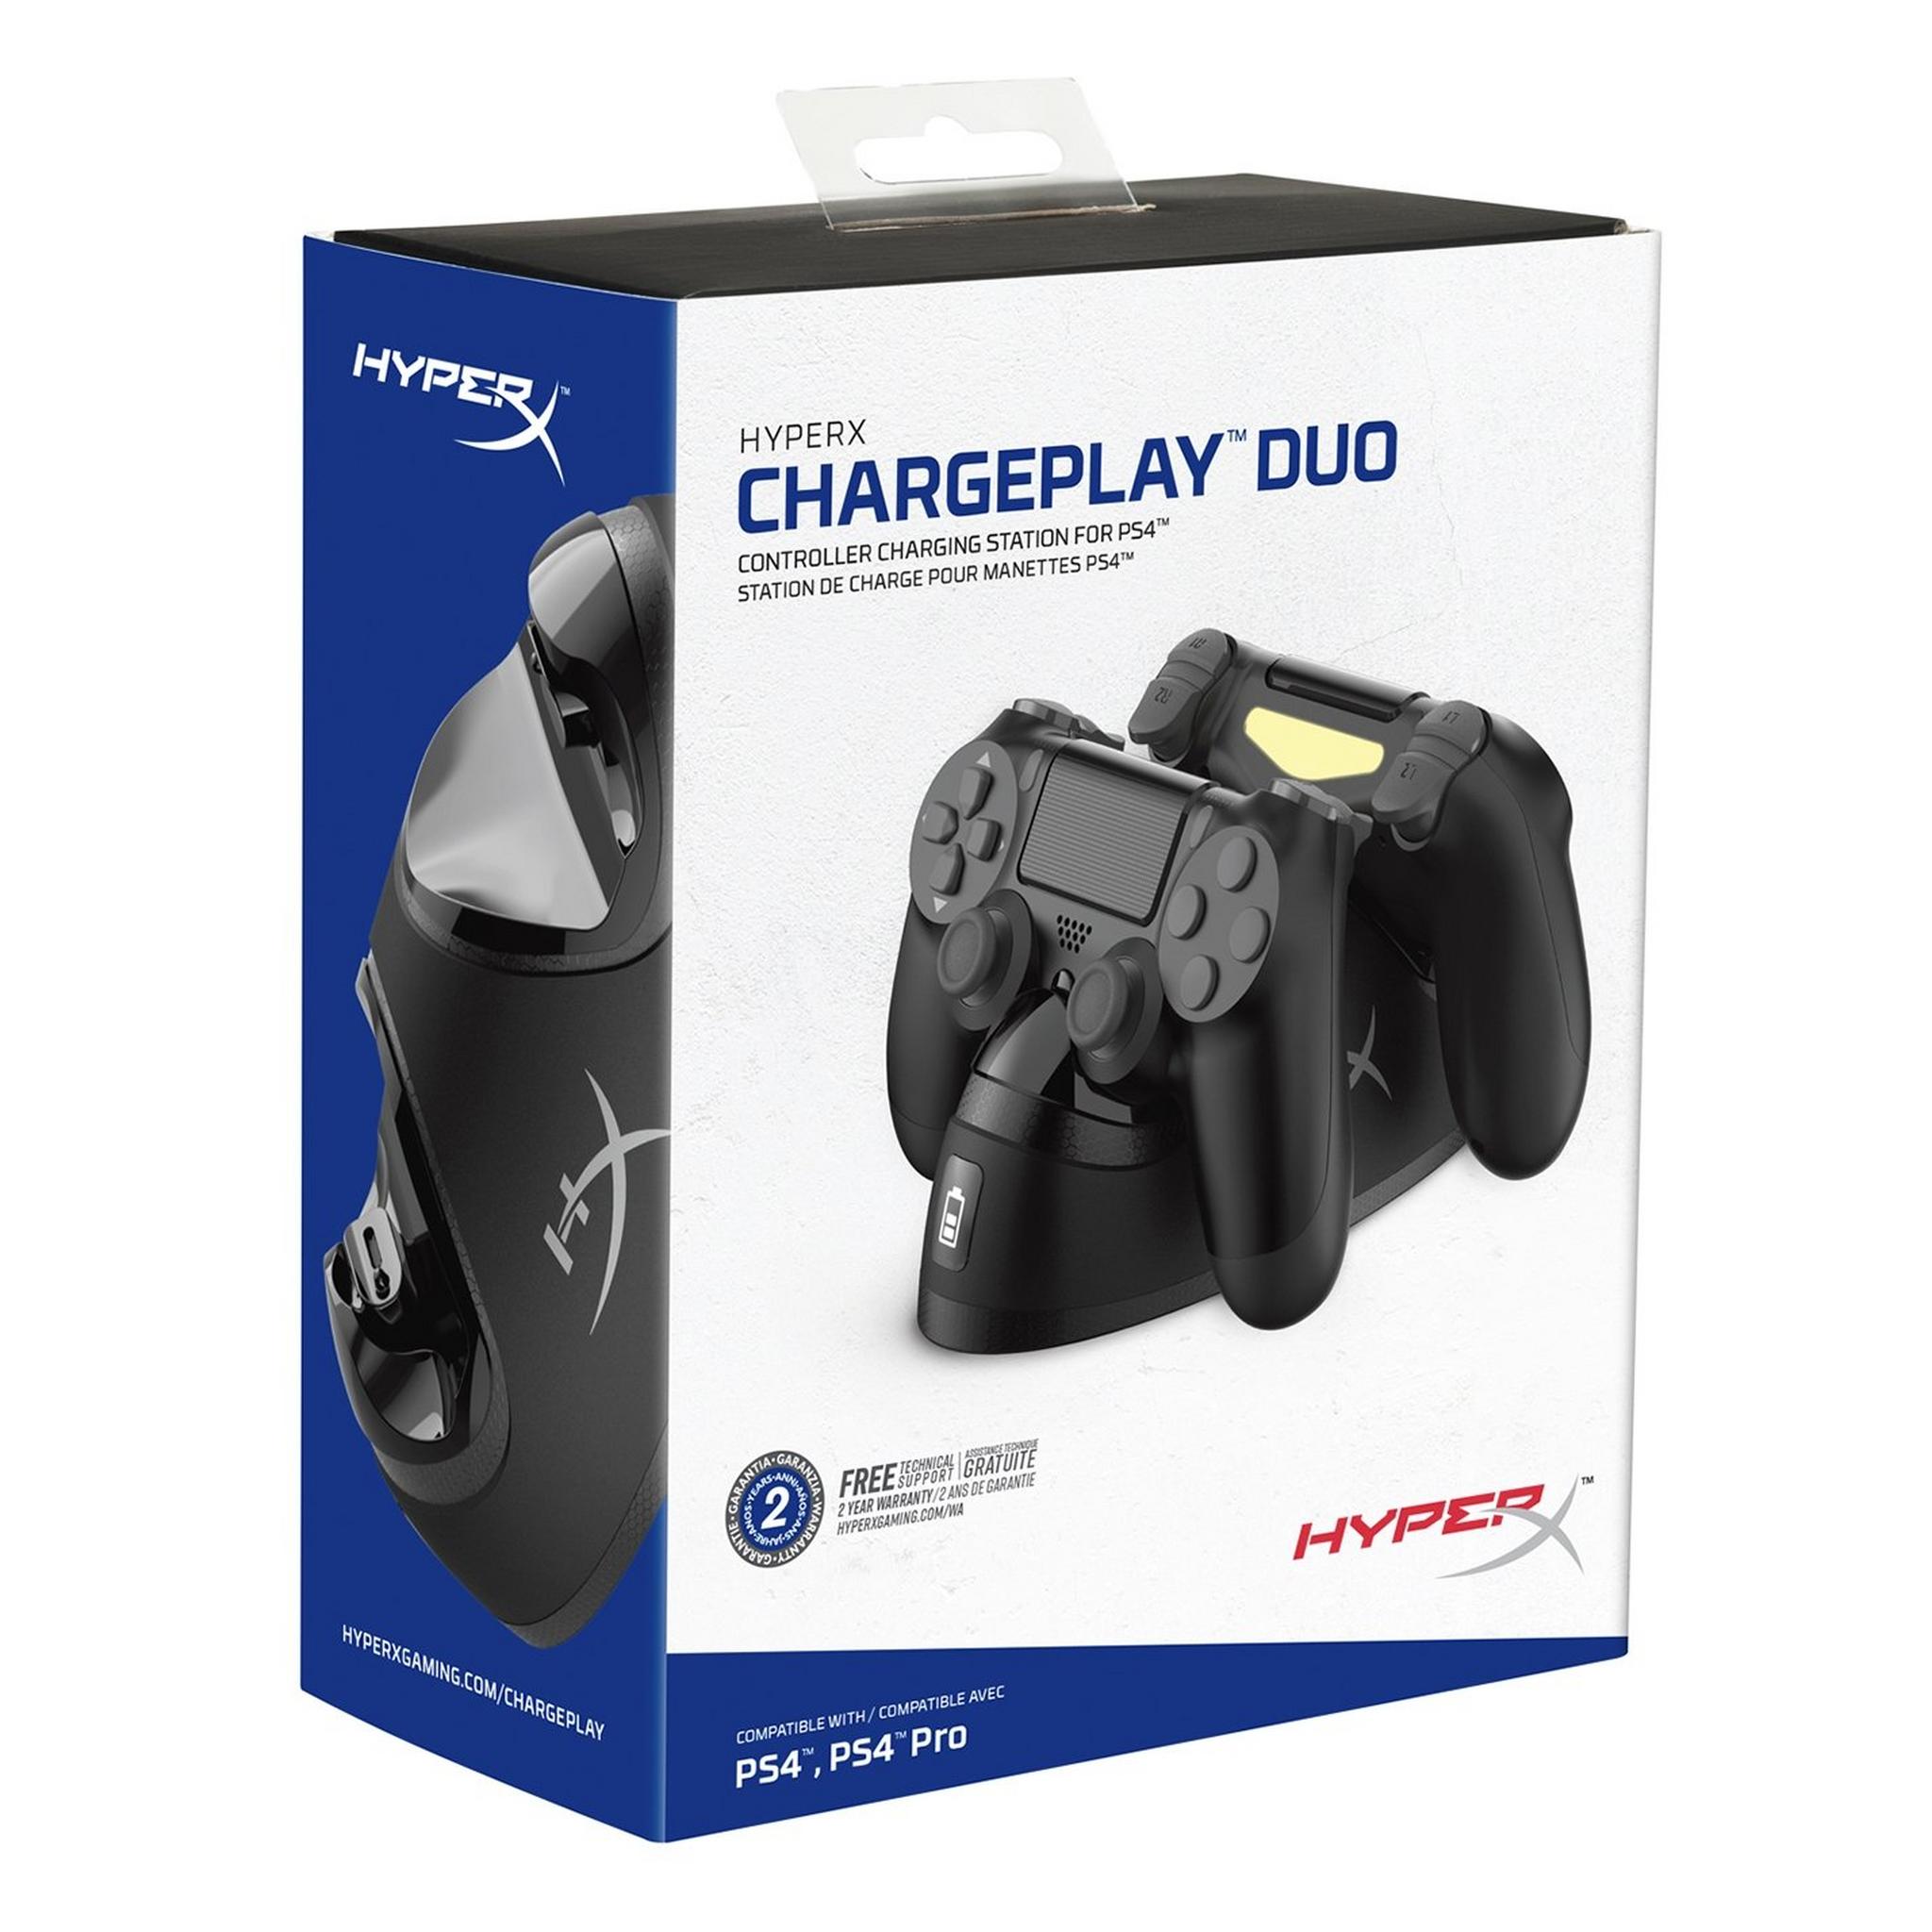 HyperX Chargeplay Duo Playstation 4 Controller Charging Station